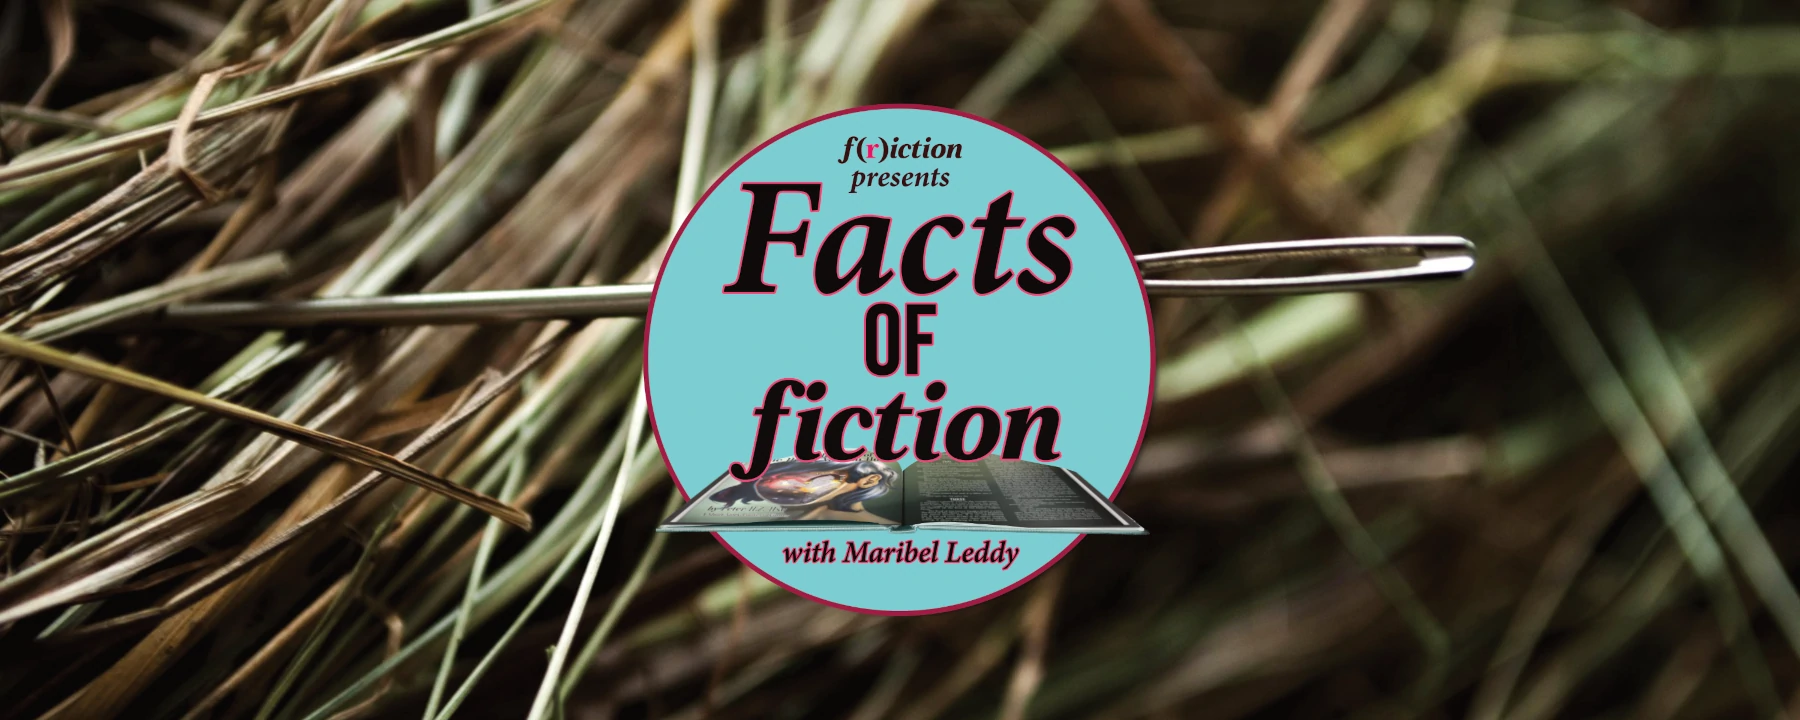 Facts of Fiction – F(r)iction